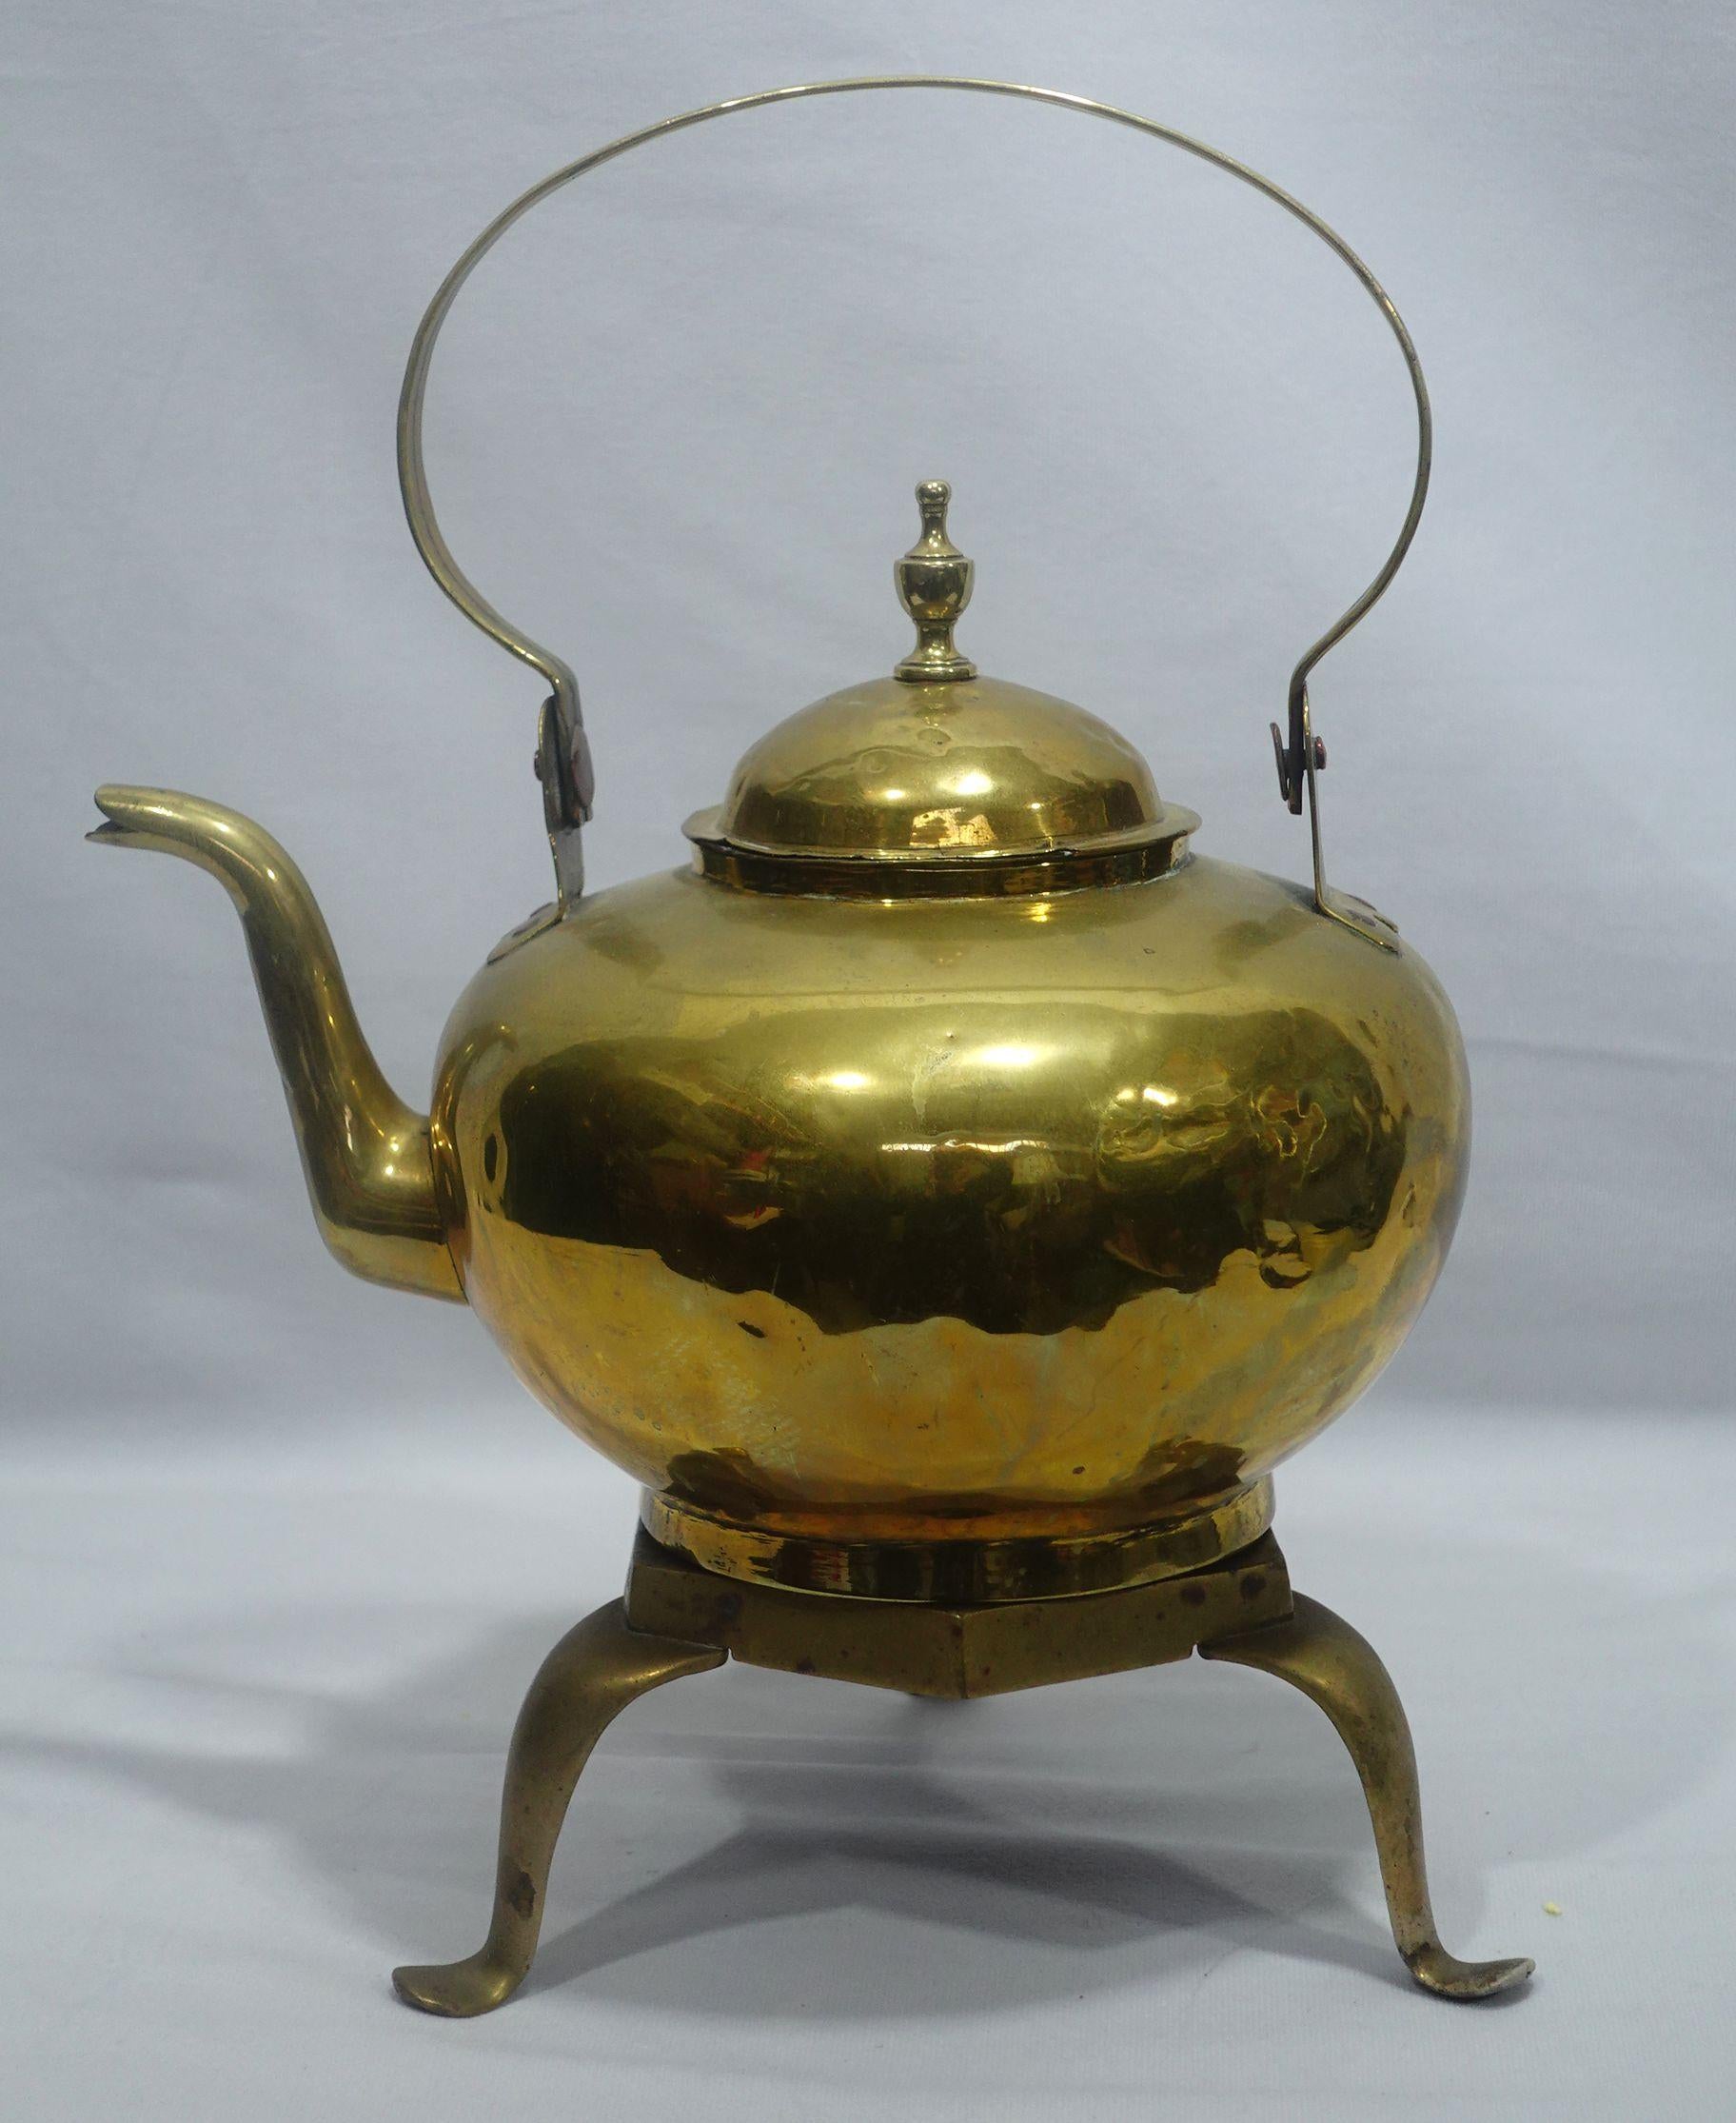 Hand-hammered a brass tea kettle wit a brass trivet made in England from the 19th century, very well hand-made with delicate craftsmanship, and highly collectible antique.
Dimensions:
Teapot: 11